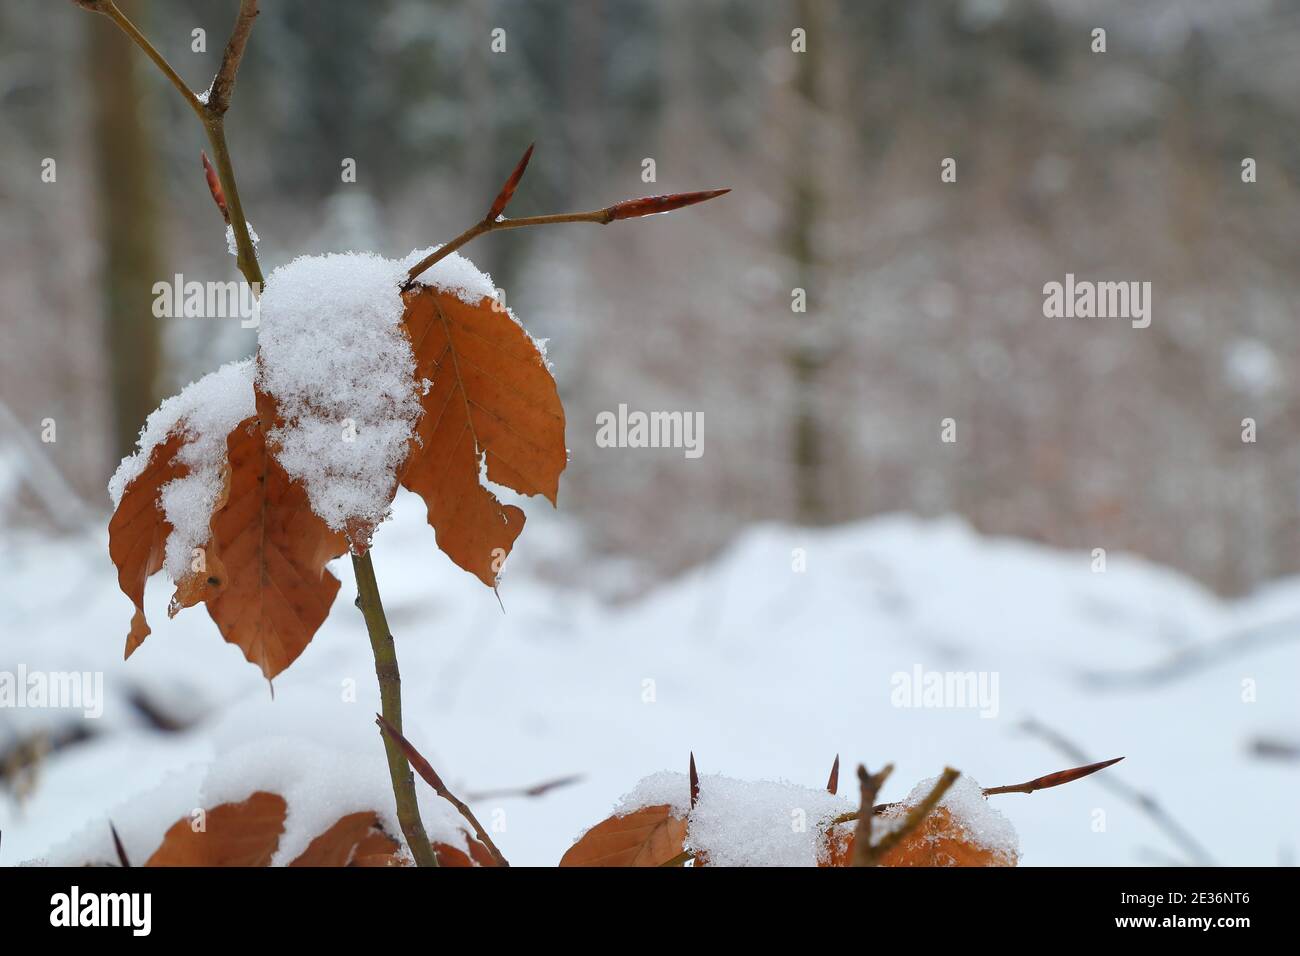 close up of twig with leaves in snowy landscape Stock Photo